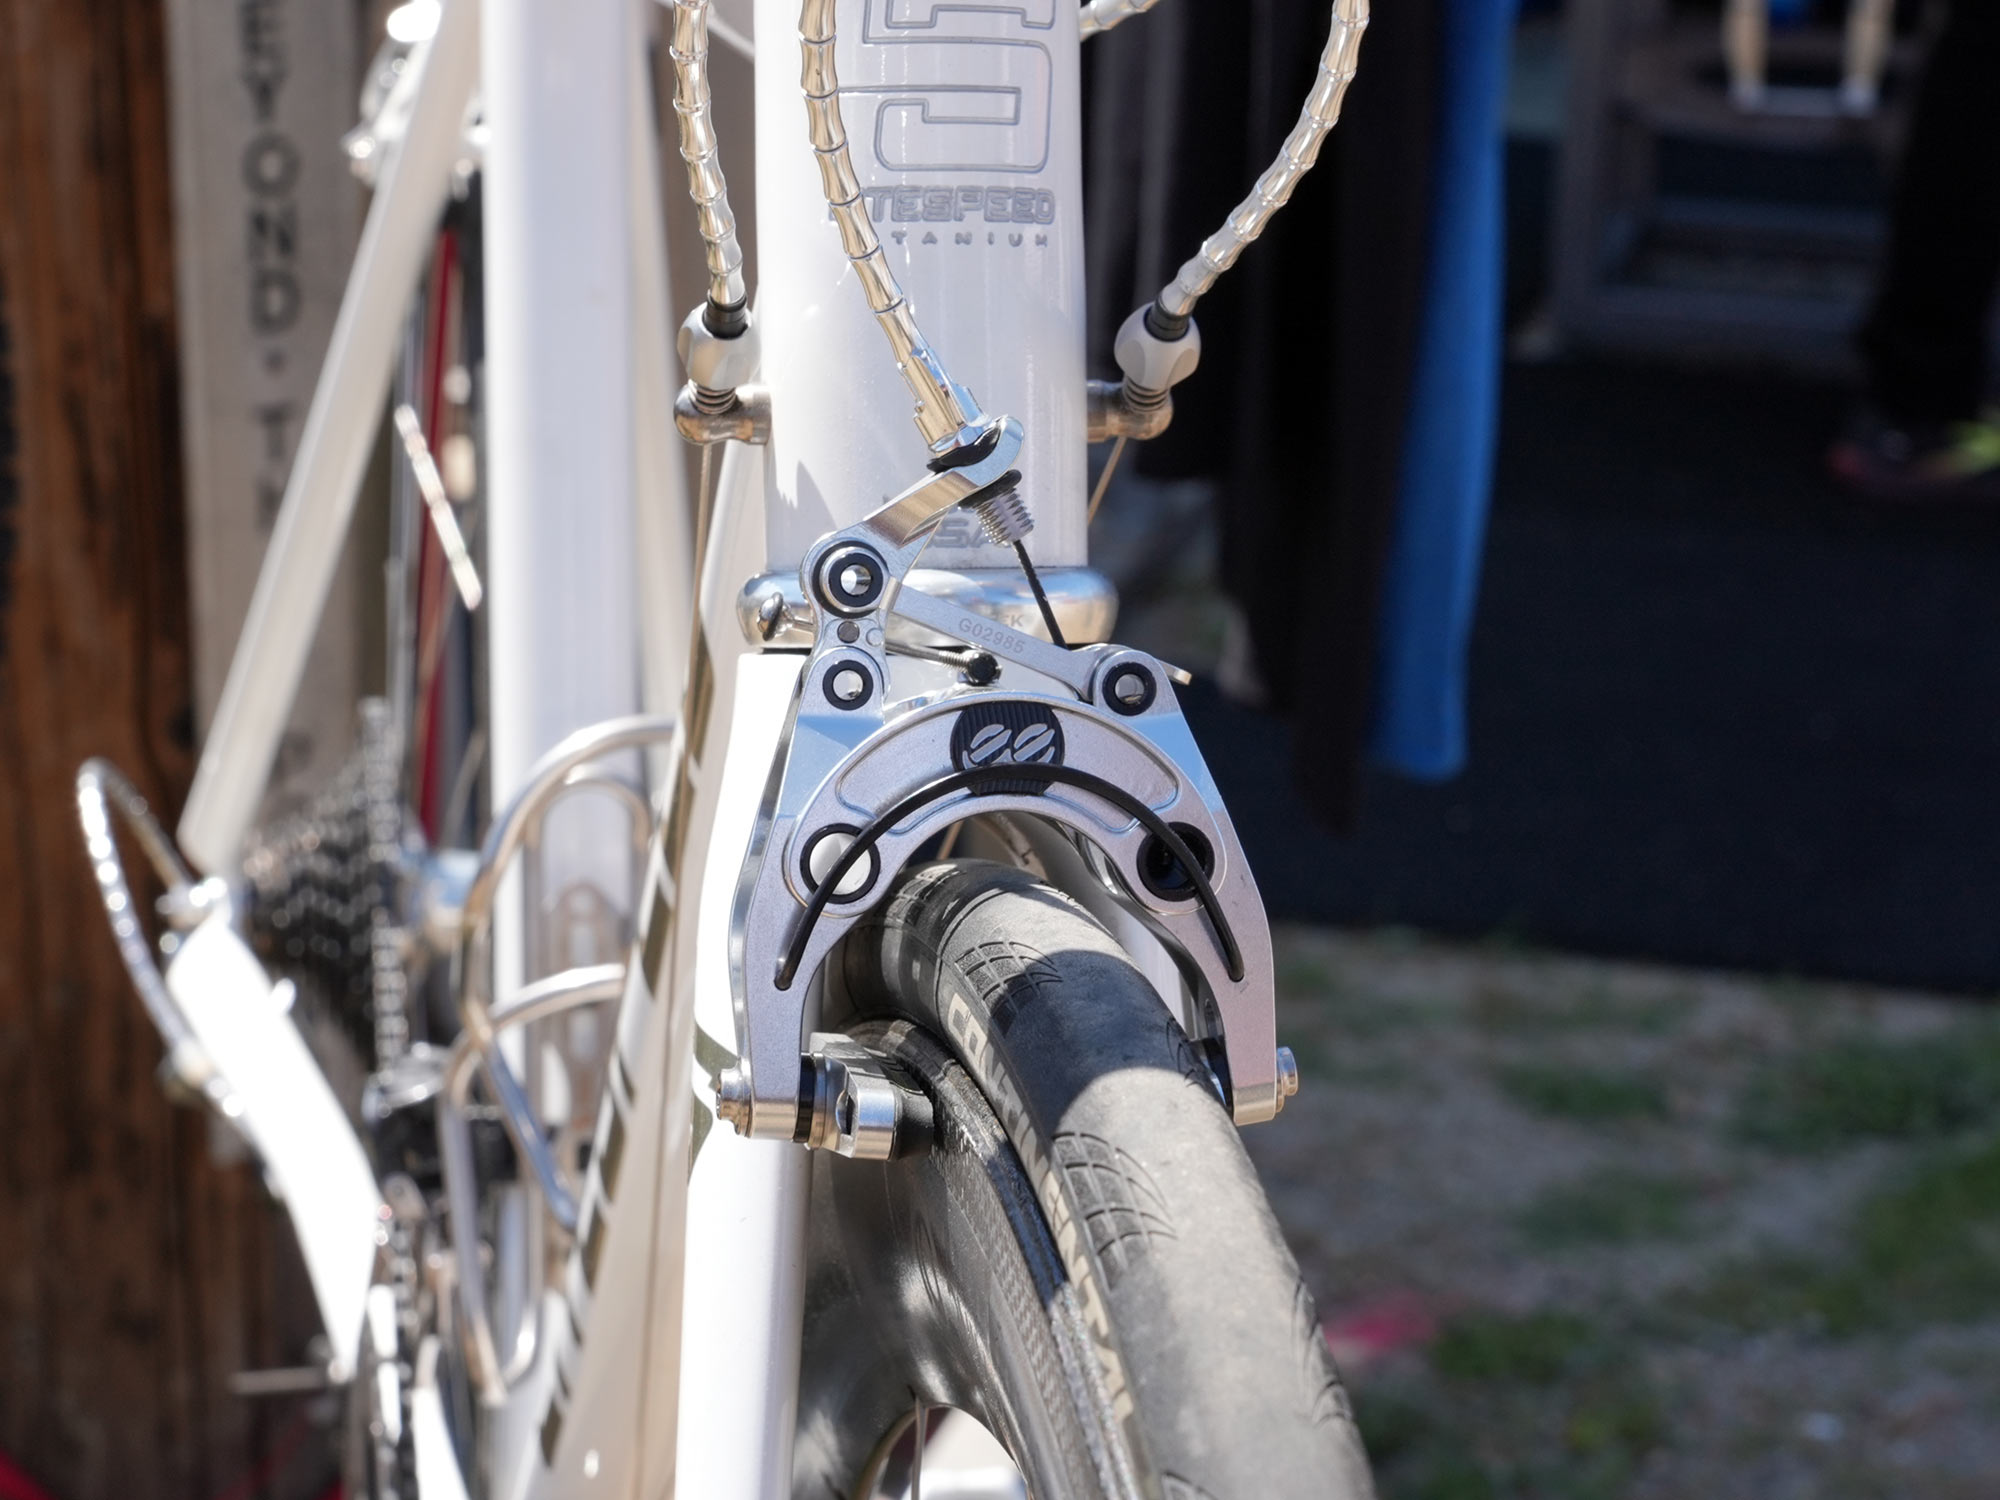 Cane Creek Shows Silver Brakes, Black Cranks & Colored Spacers